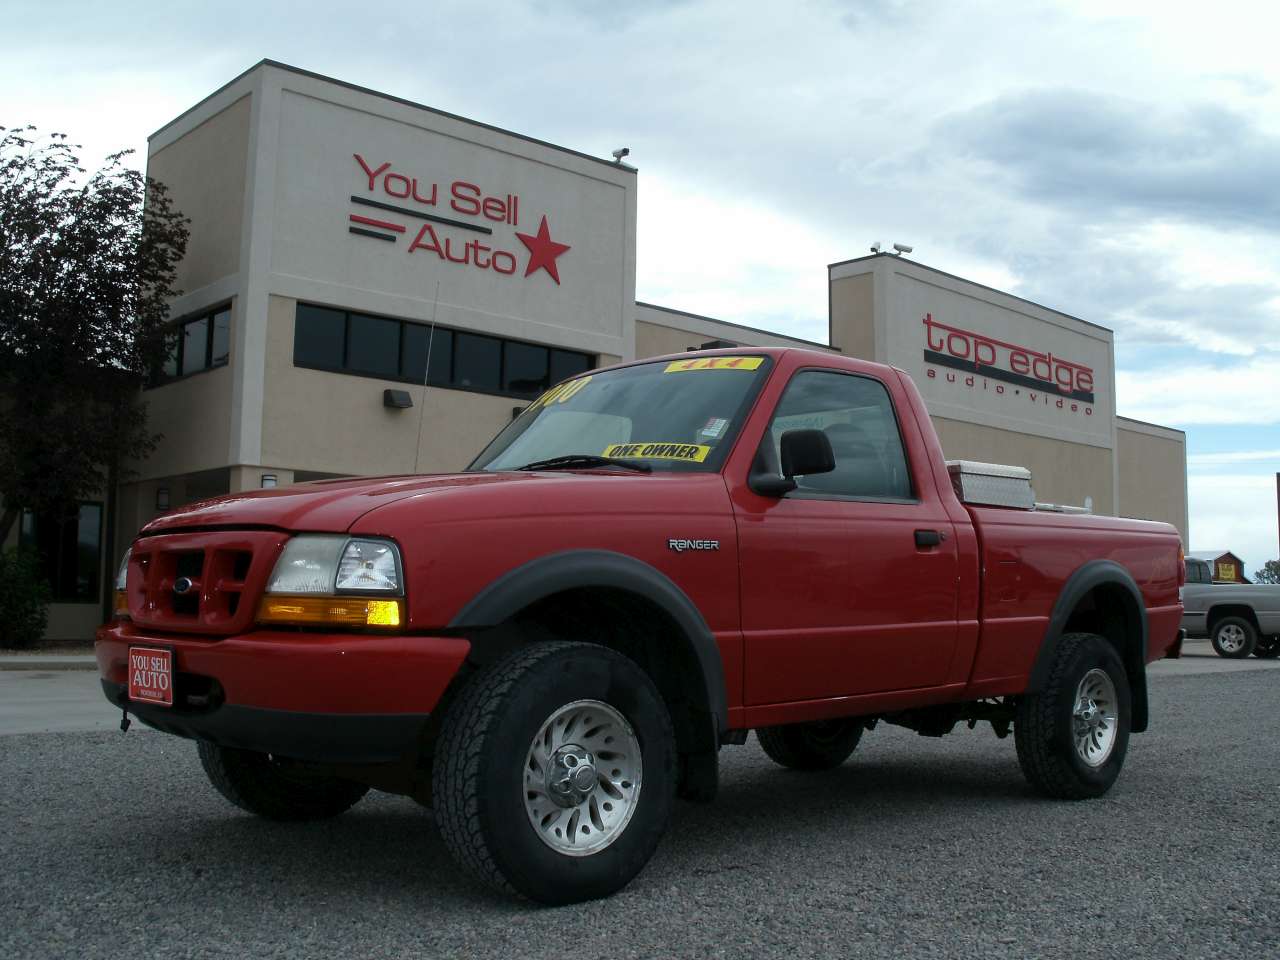 1999 FORD RANGER Sport 4x4 SOLD! | You Sell Auto 1999 Ford Ranger V6 Towing Capacity